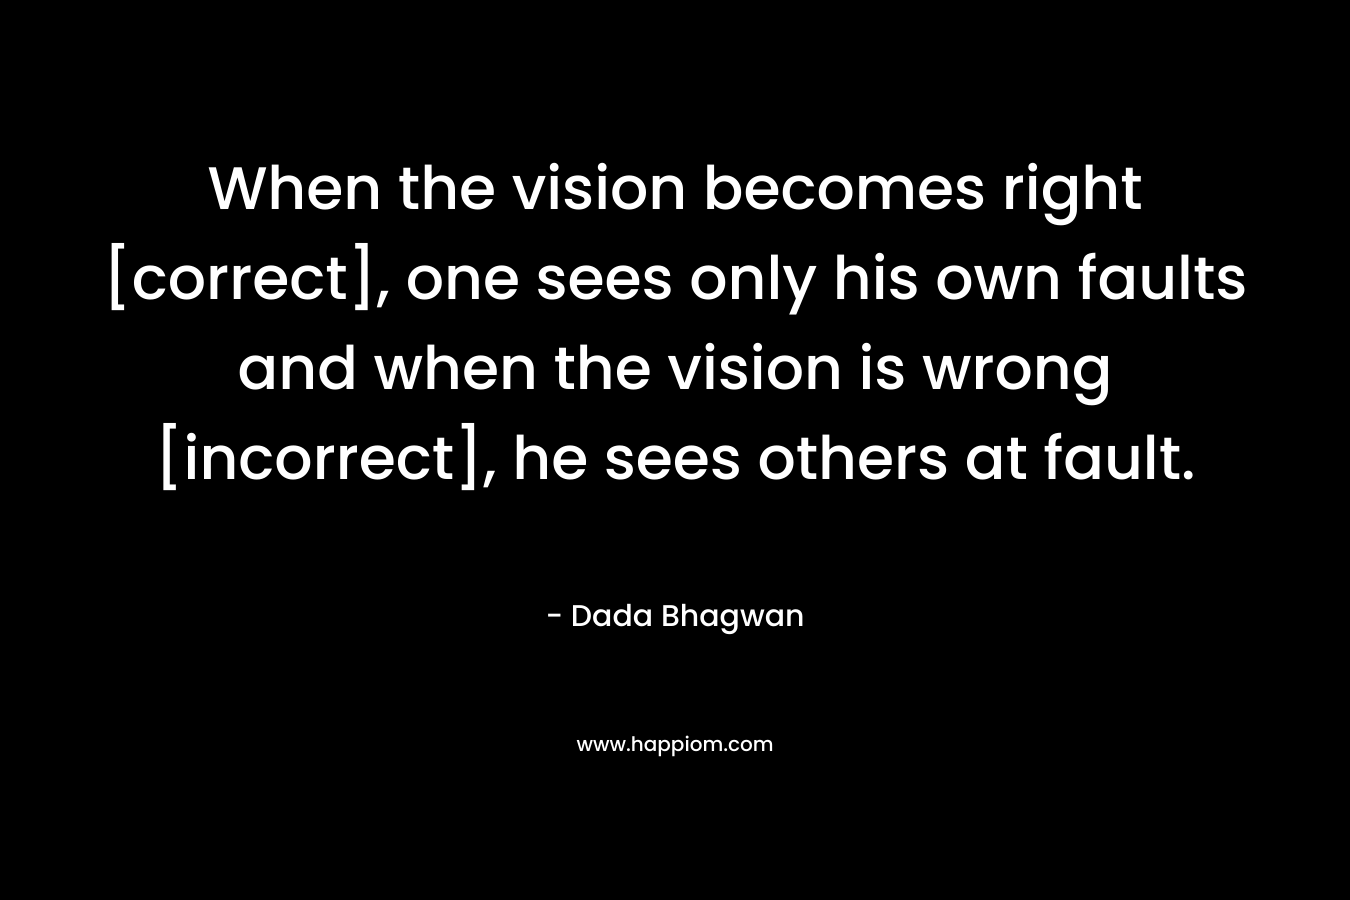 When the vision becomes right [correct], one sees only his own faults and when the vision is wrong [incorrect], he sees others at fault.